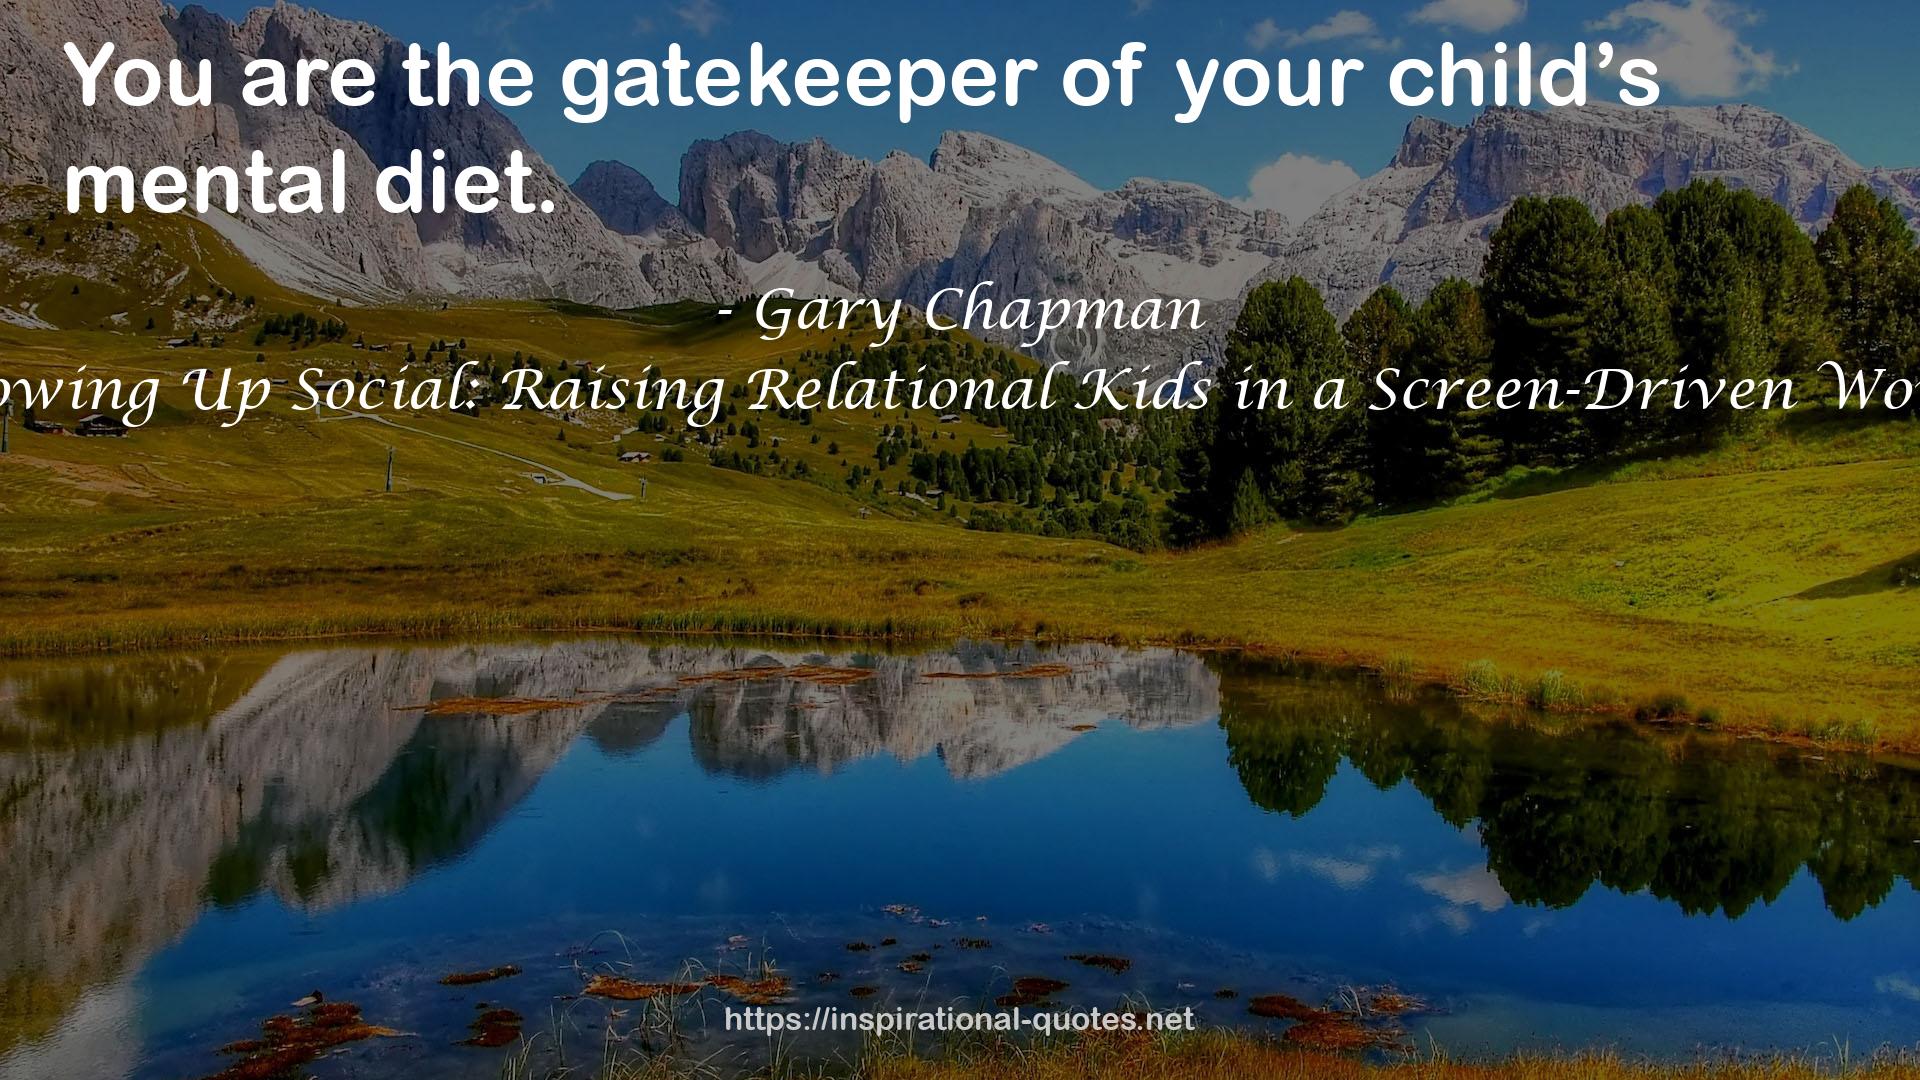 Growing Up Social: Raising Relational Kids in a Screen-Driven World QUOTES